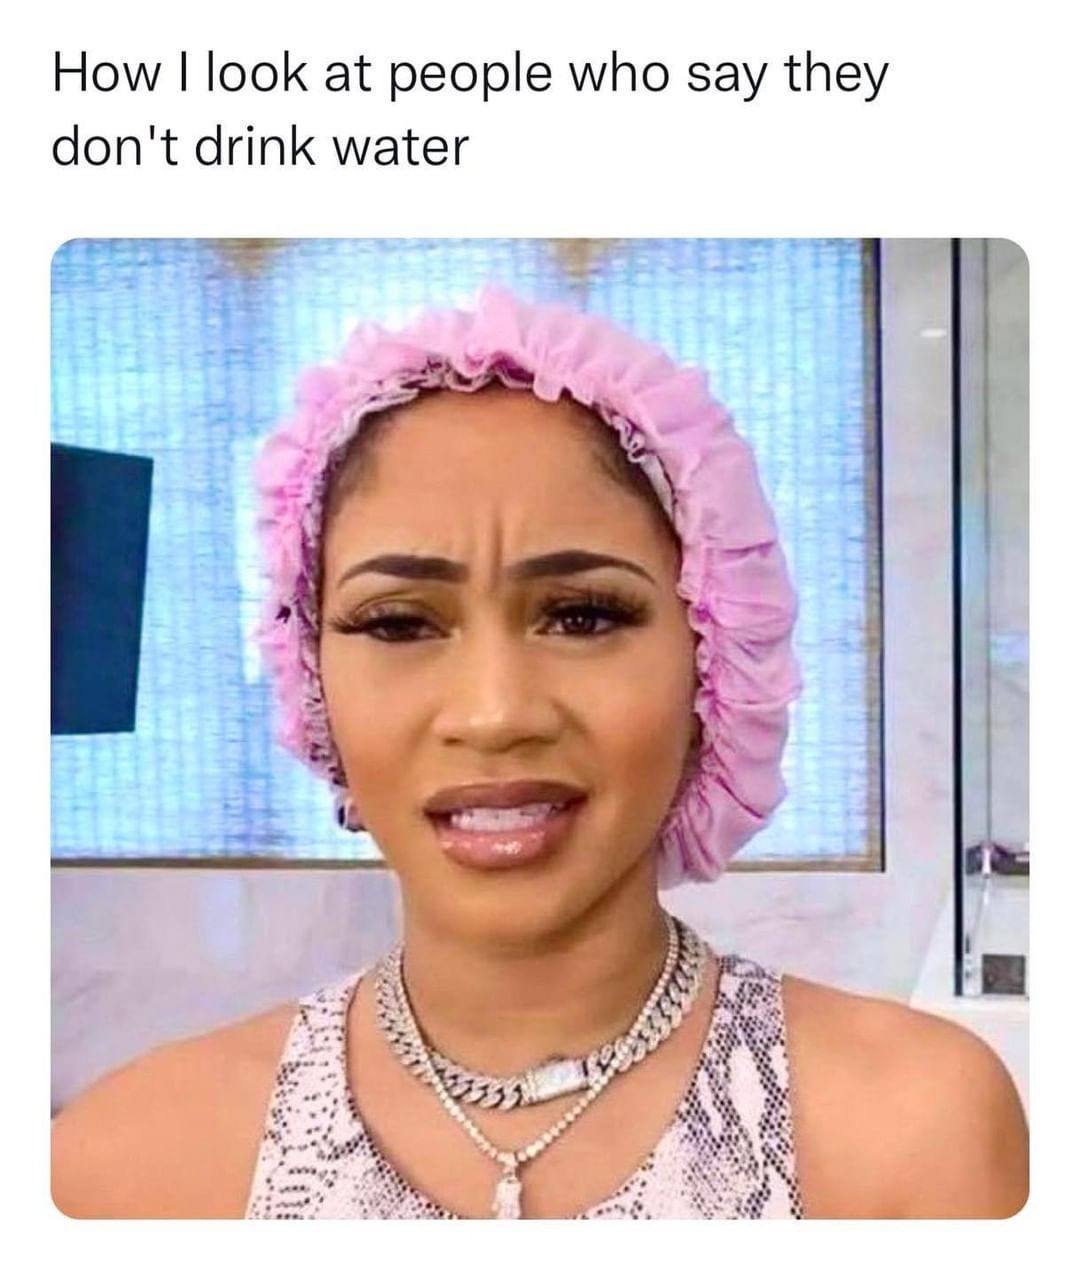 How I look at people who say they don't drink water.